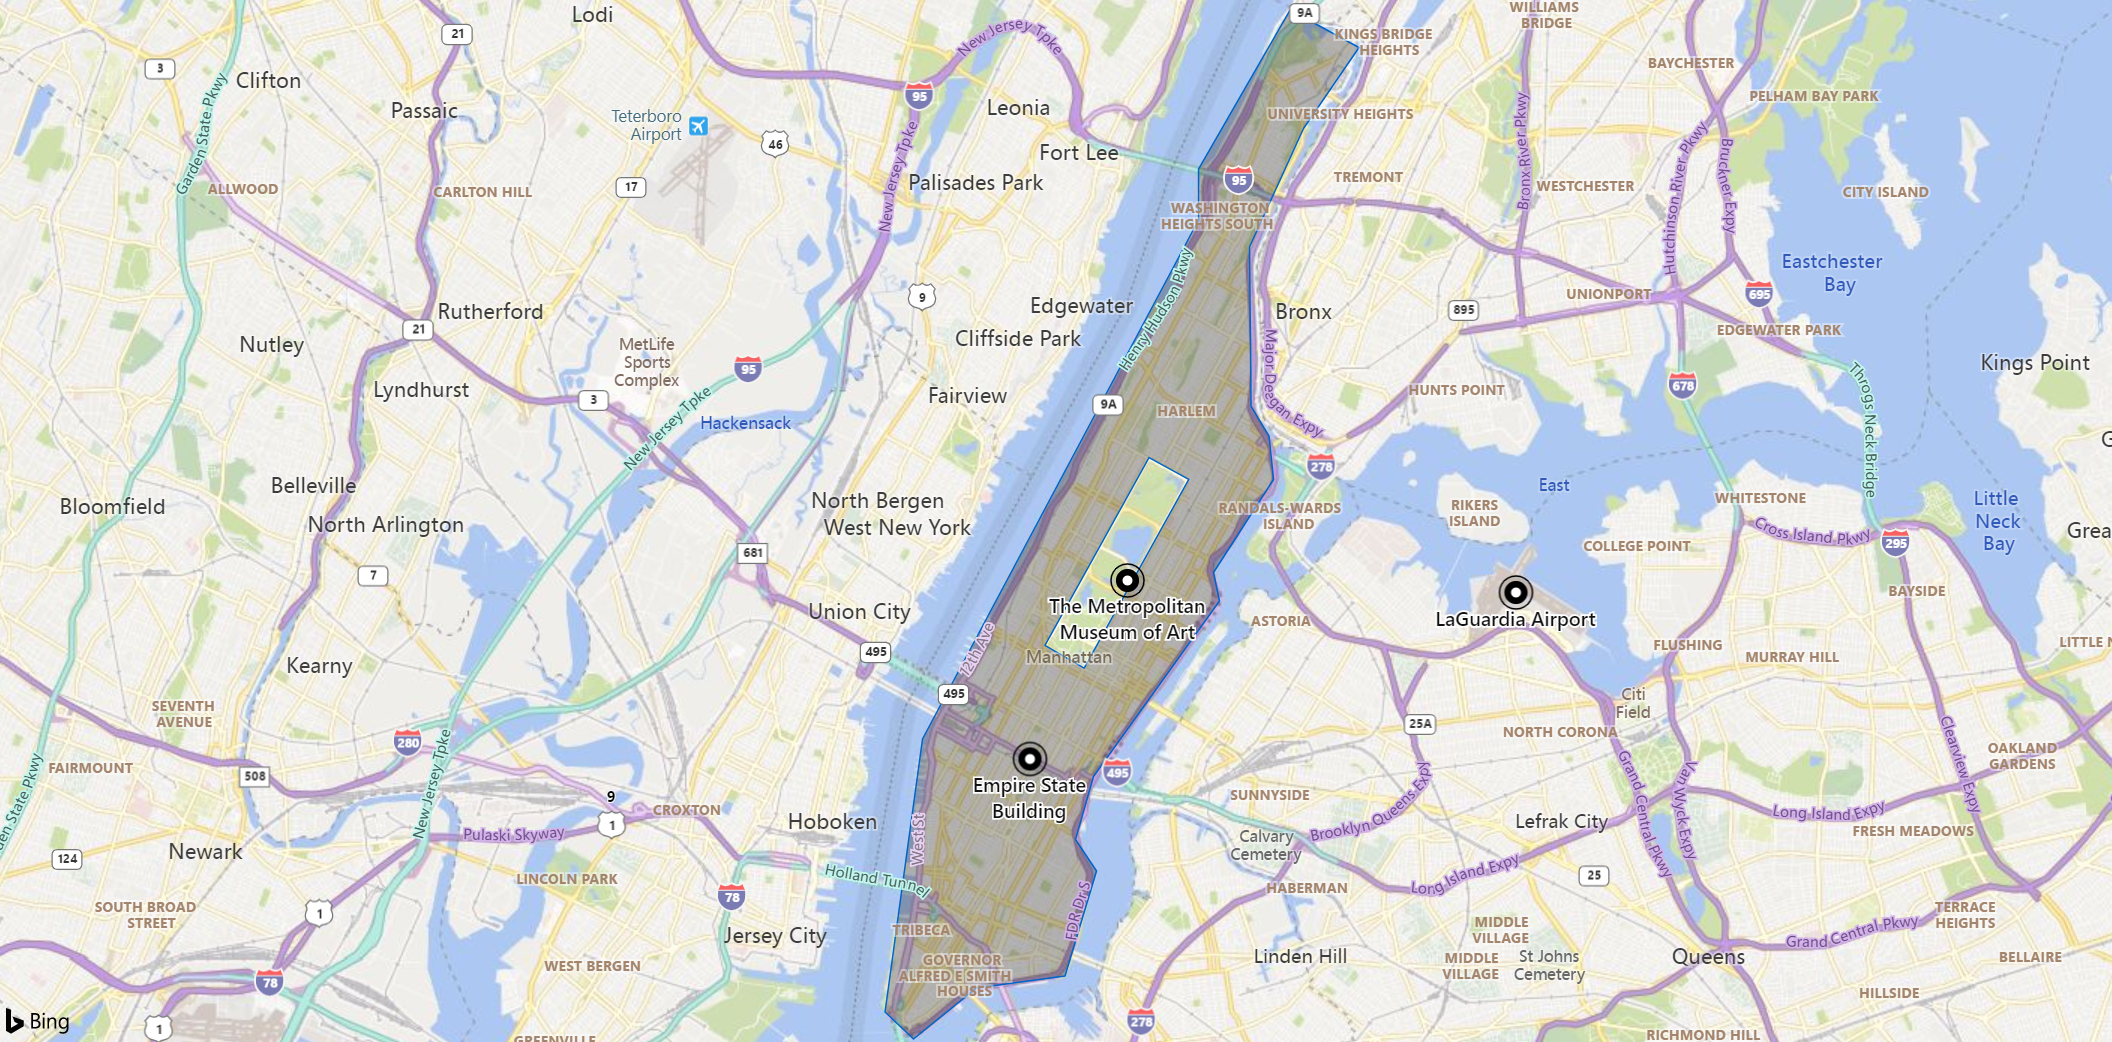 Screenshot of a map of the Manhattan area, with markers for a landmark, a museum, and an airport. The island appears dimmed except for Central Park.